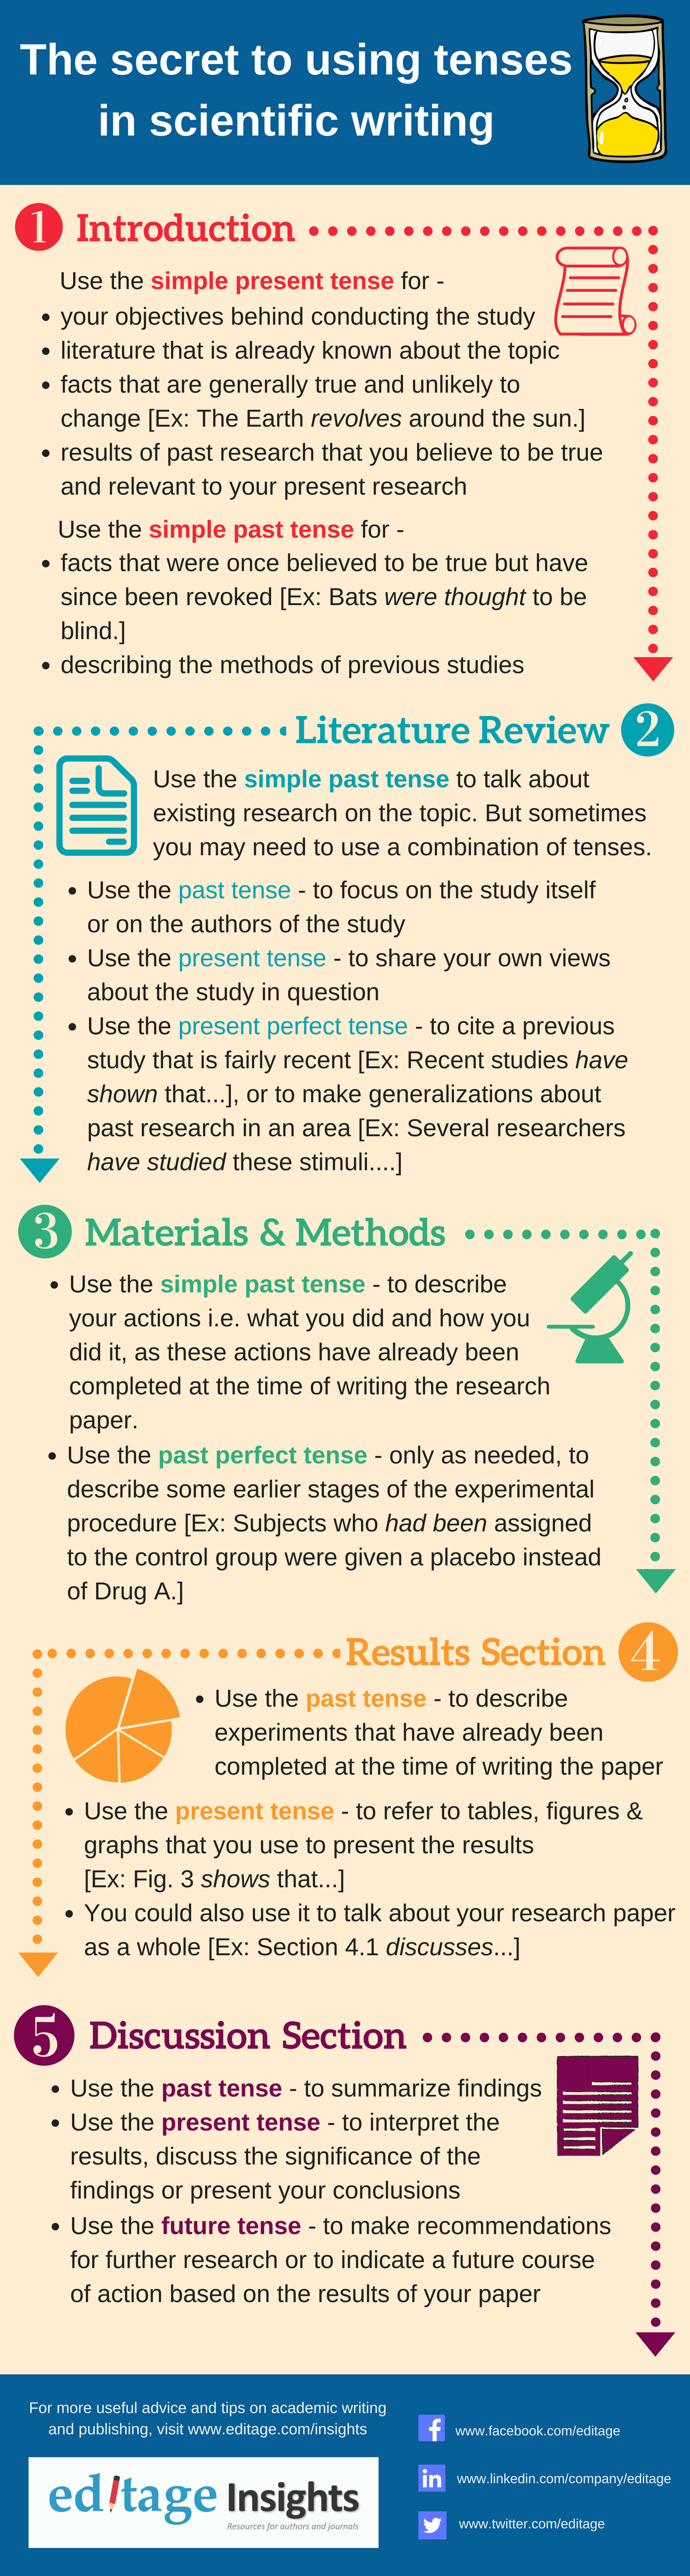 It is often used in health care and the natural sciences. The Secret To Using Tenses In Scientific Writing Infographic